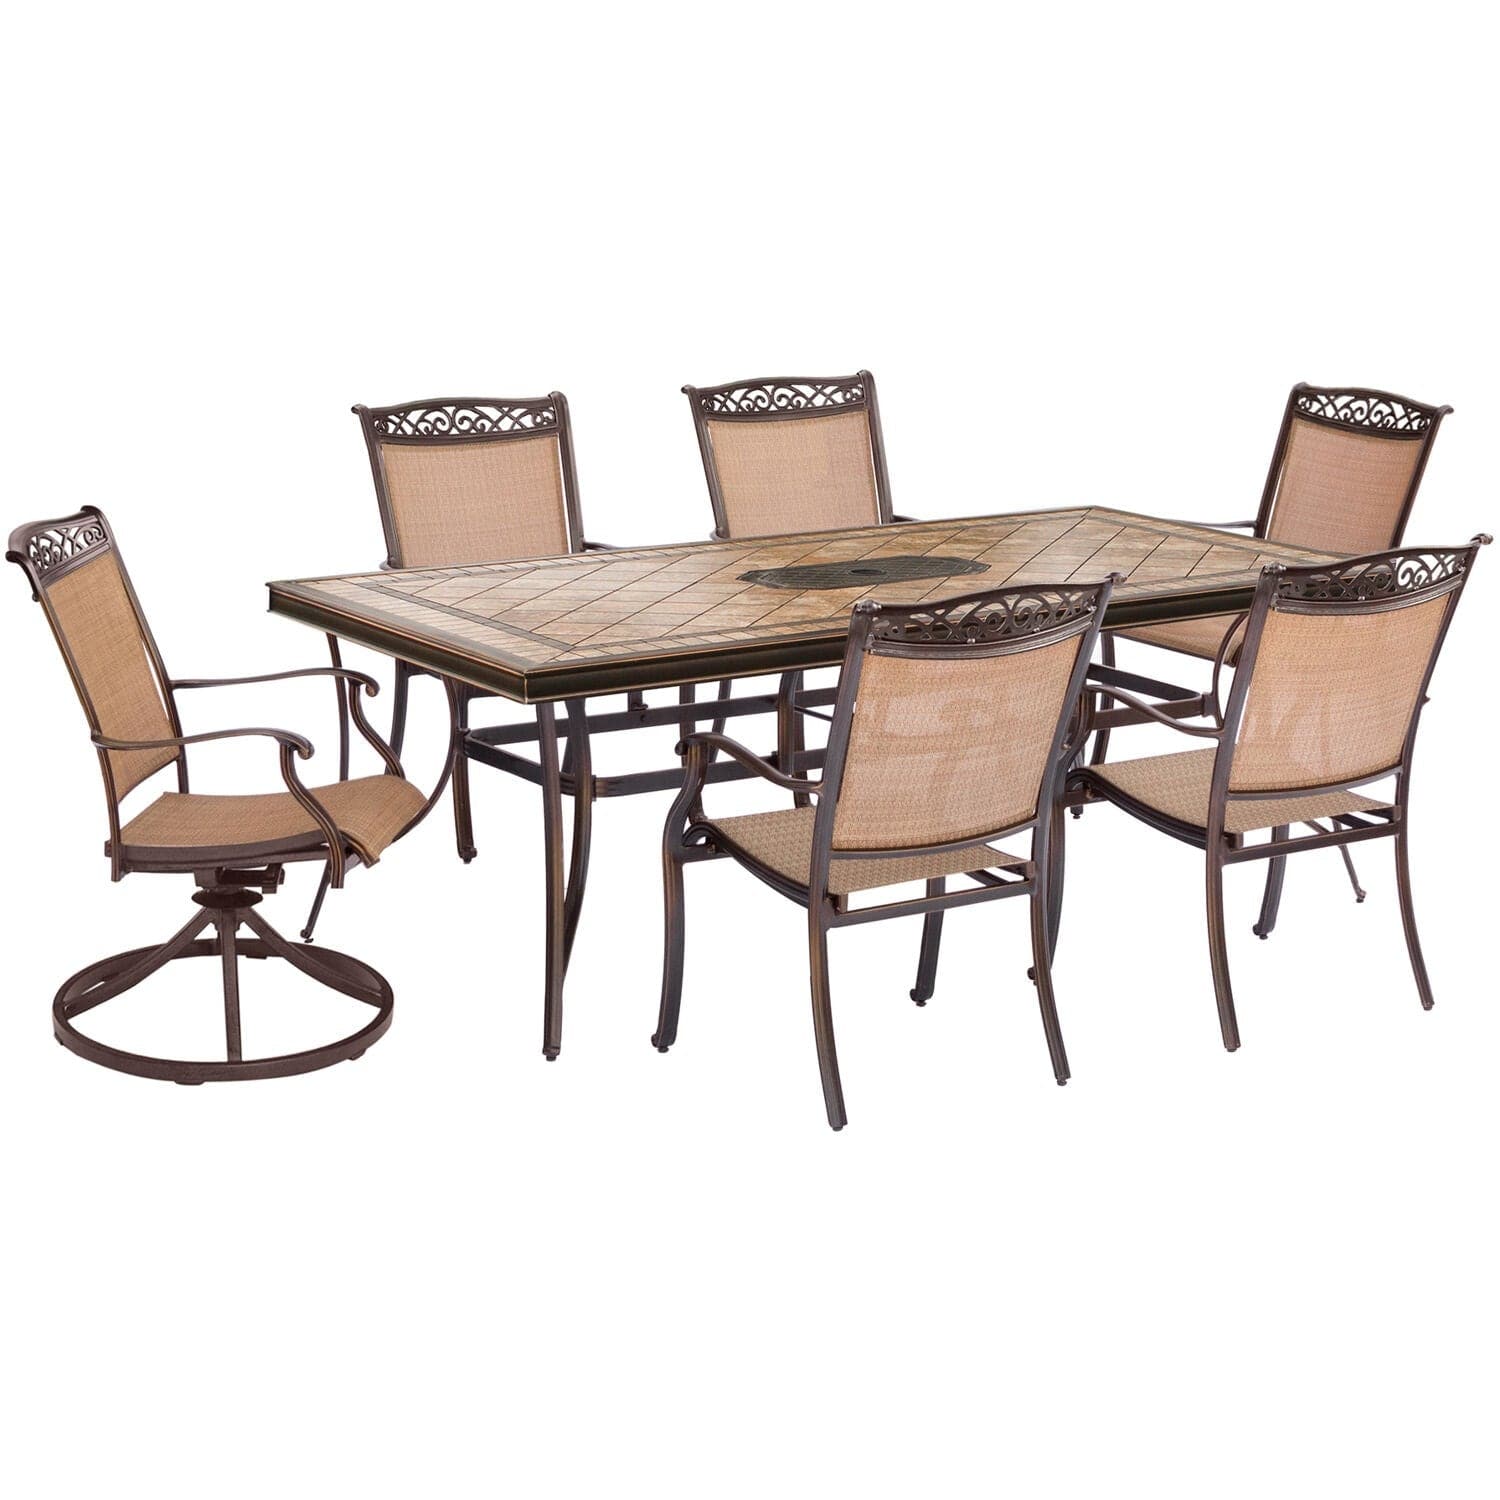 Hanover Outdoor Dining Set Hanover- Fontana 7 Piece Dining Set with Two Swivel Rockers | Four Stationary Dining Chairs | and a Large Tile-Top Dining Table | FNTDN7PCSWTN-2